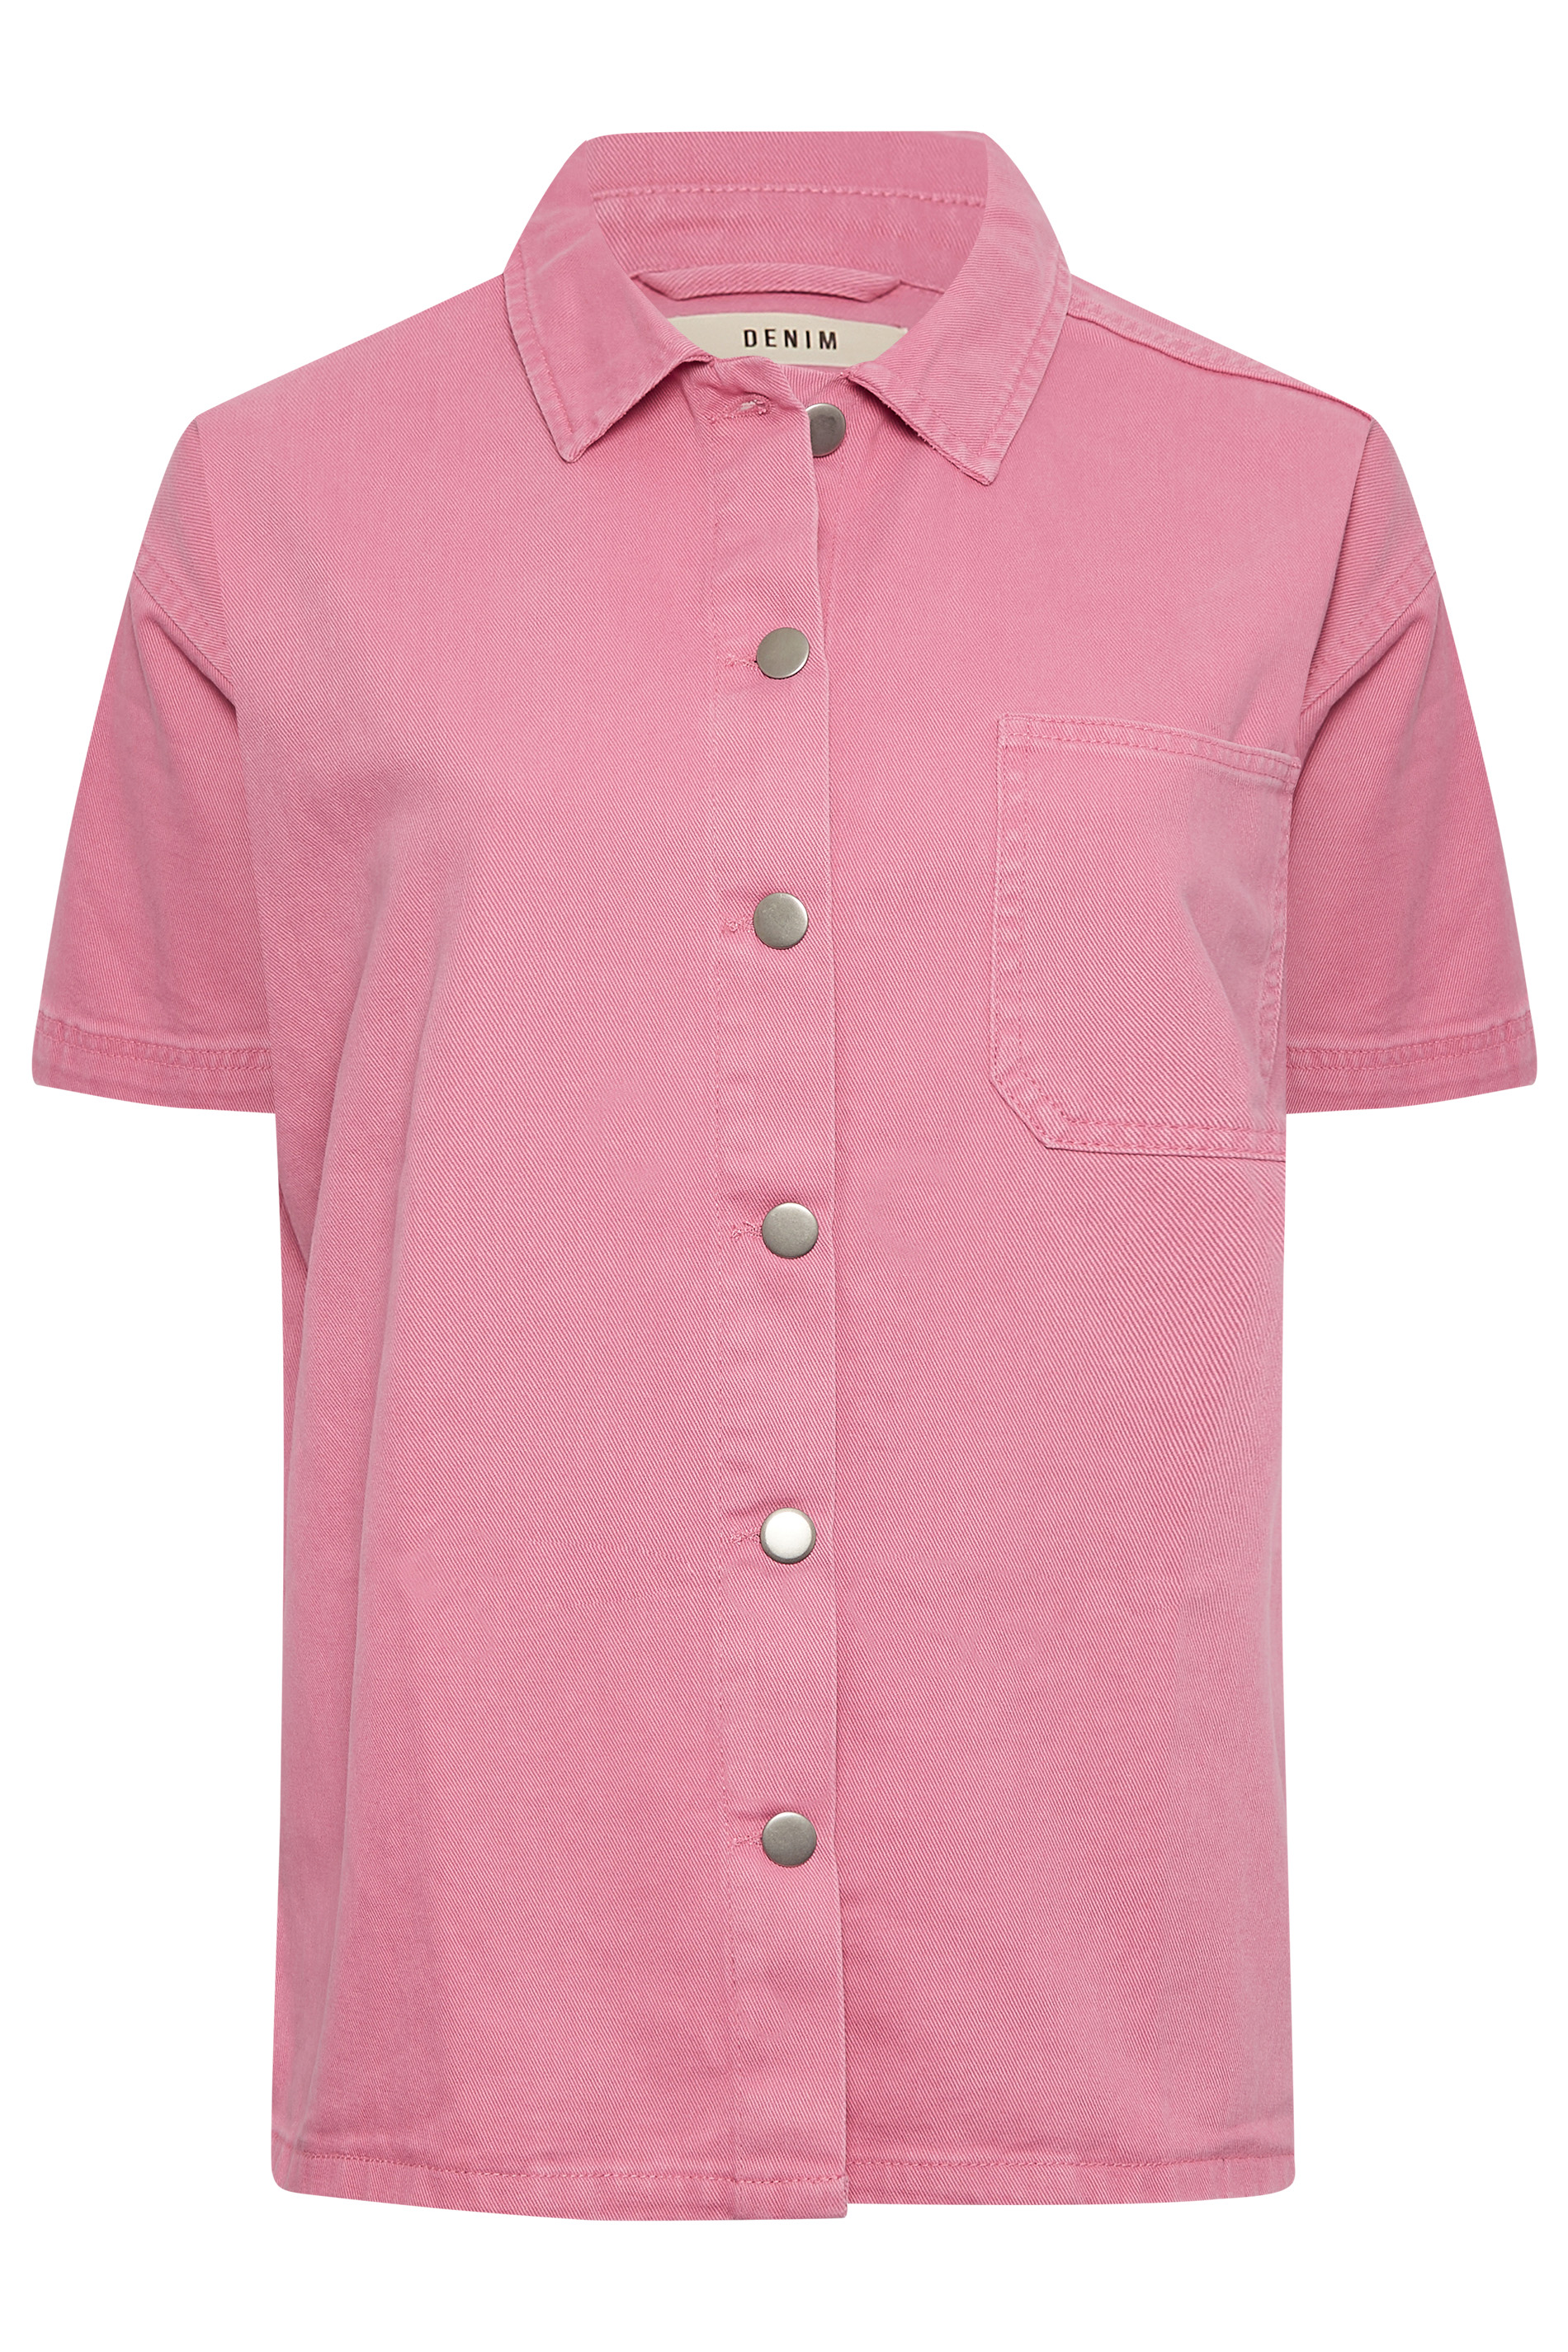 Counterparts Pink Size Small Ladies Casual Shirts